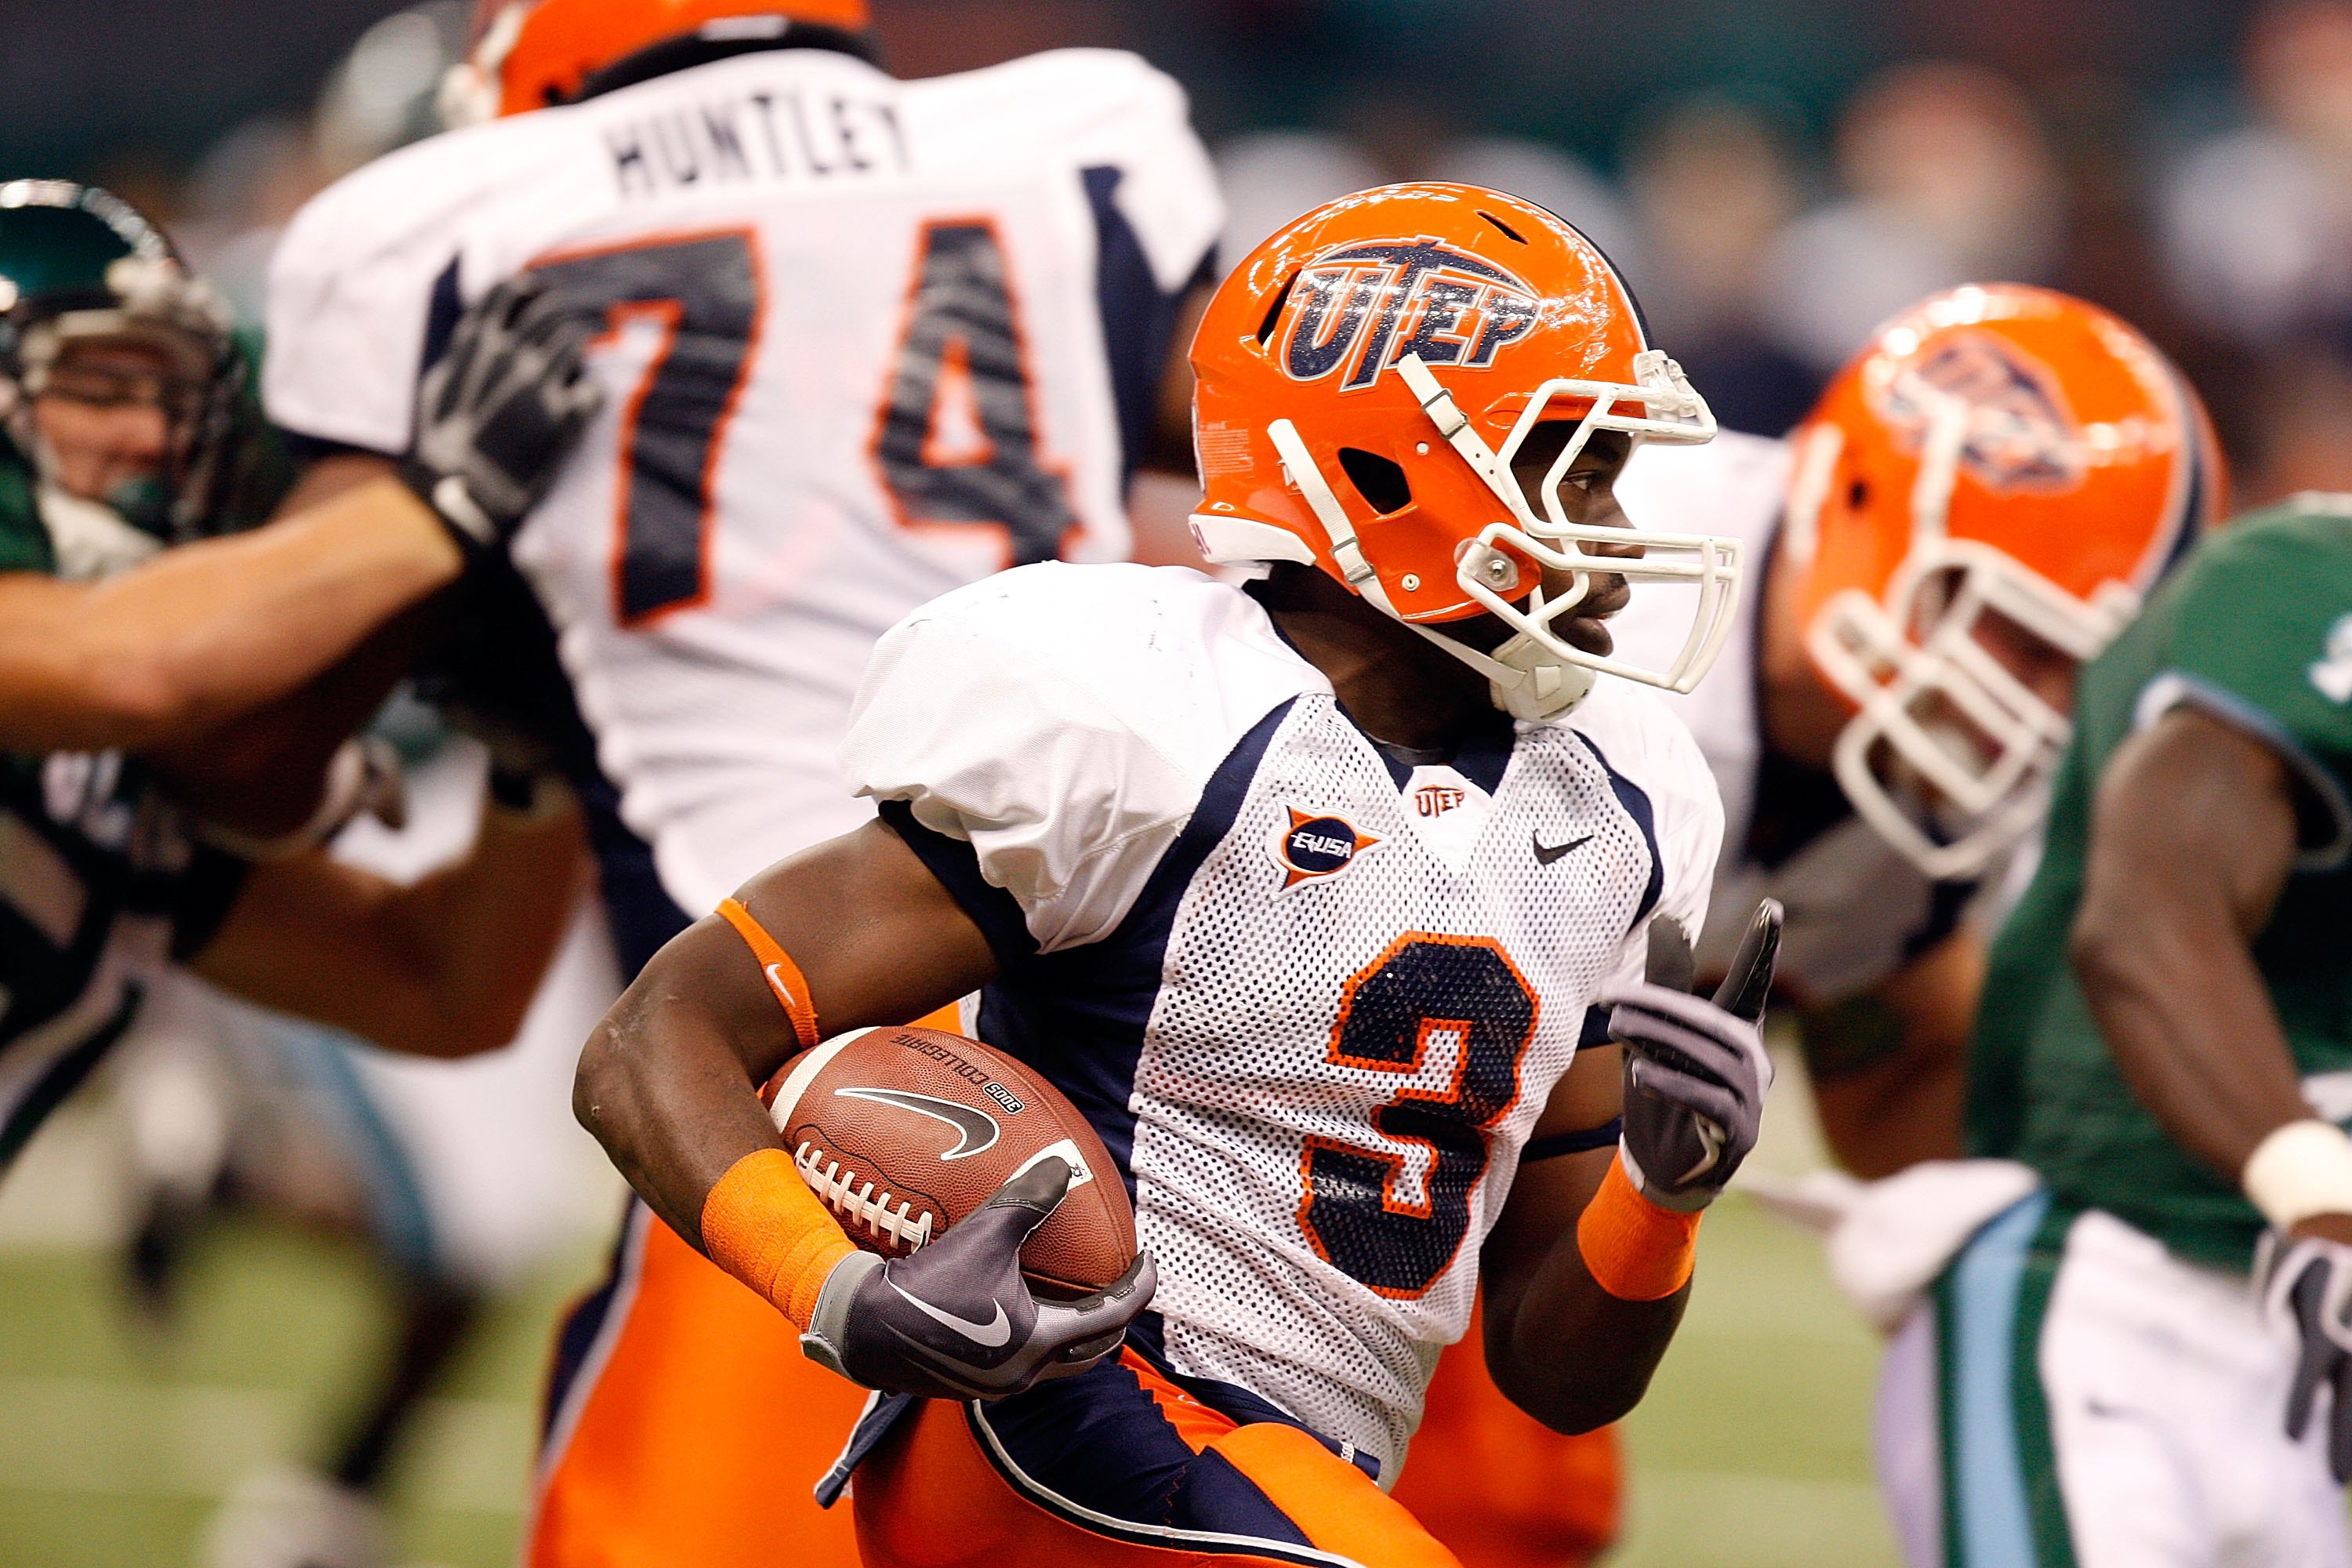 NEW ORLEANS - NOVEMBER 07:  Running back Donald Buckram #3 of the UTEP Miners at Louisana Superdome on November 7, 2009 in New Orleans, Louisiana.  (Photo by Ronald Martinez/Getty Images)